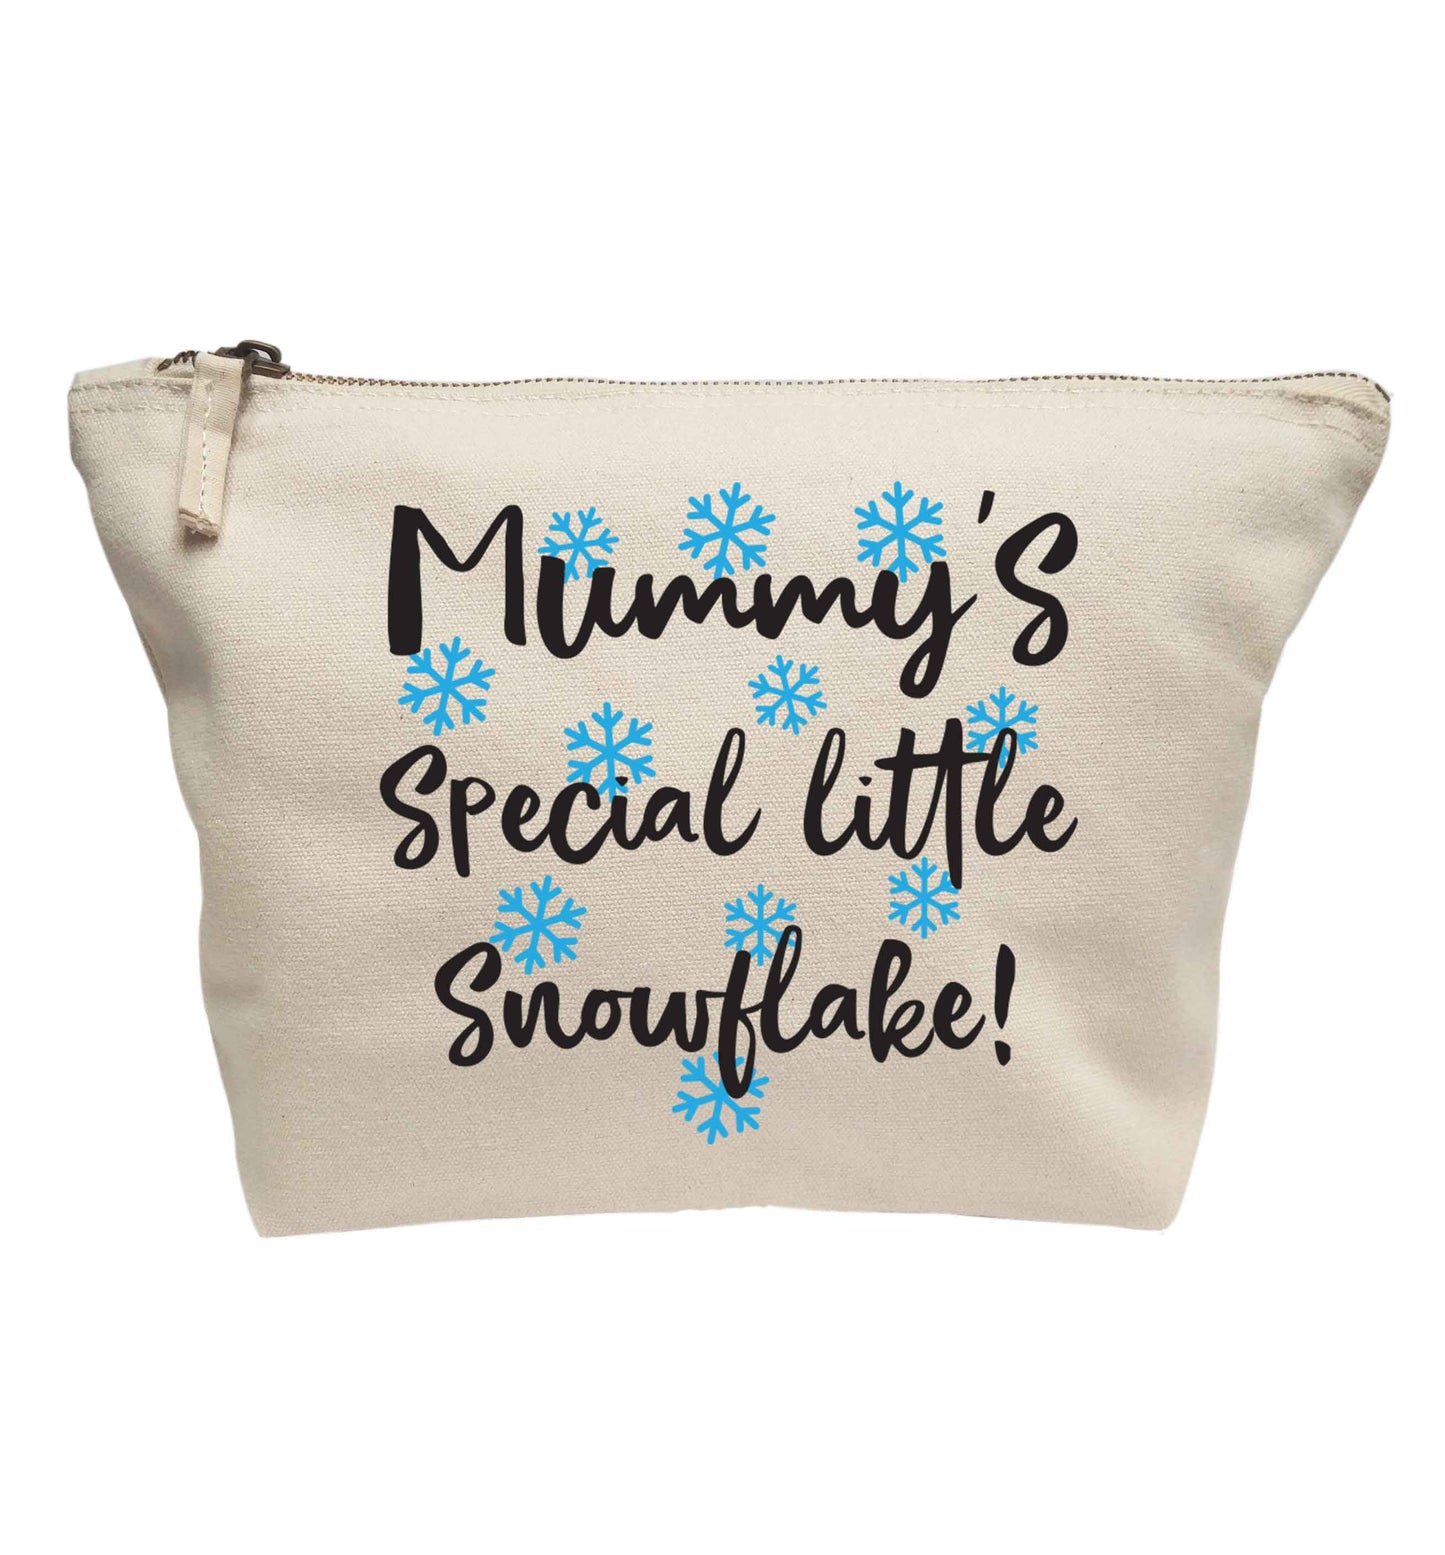 Mummy's special little snowflake | makeup / wash bag